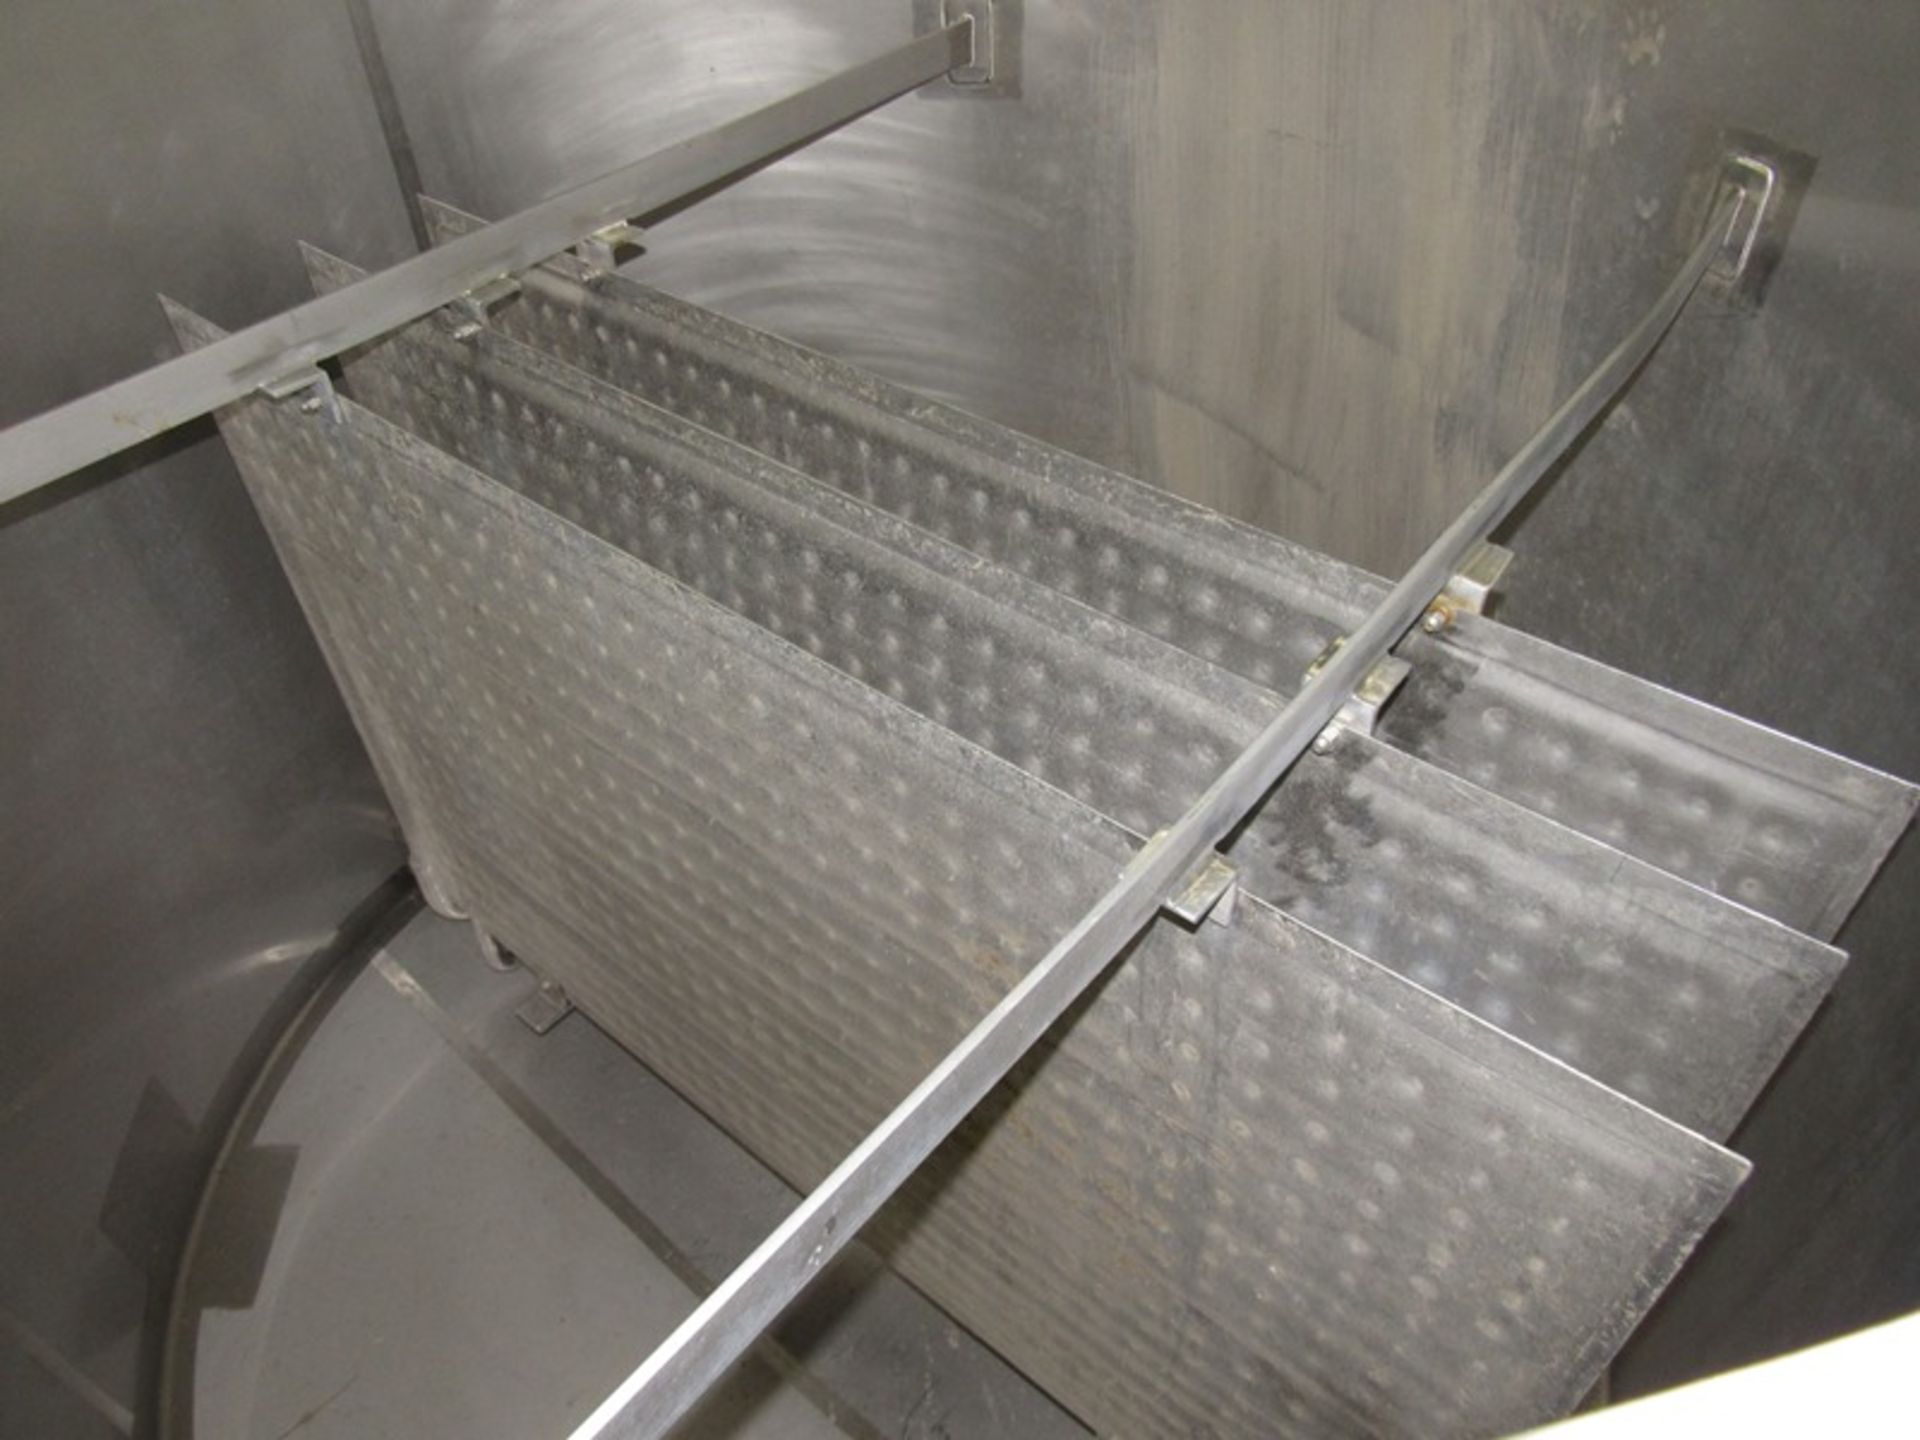 Letsch Stainless Steel Single Wall Tank, 72" dia. X 60" deep cone bottom, (3) stainless steel - Image 5 of 7